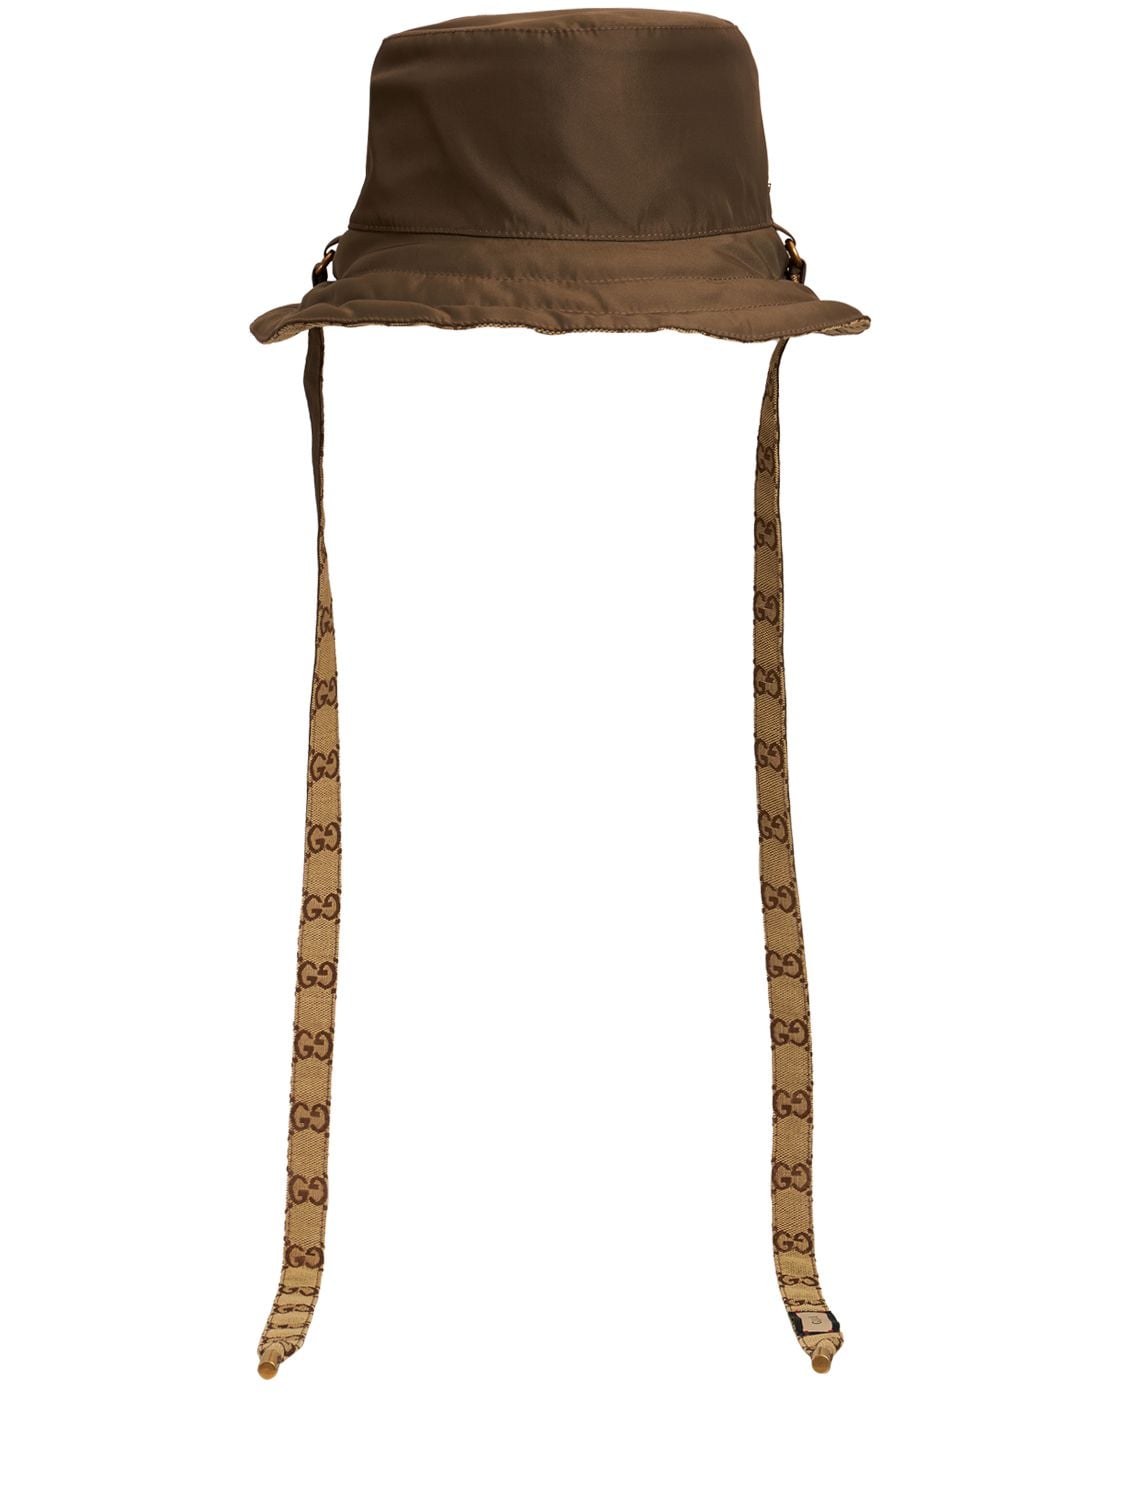 Shop the Reversible hat in GG canvas and nylon in brown at GUCCI